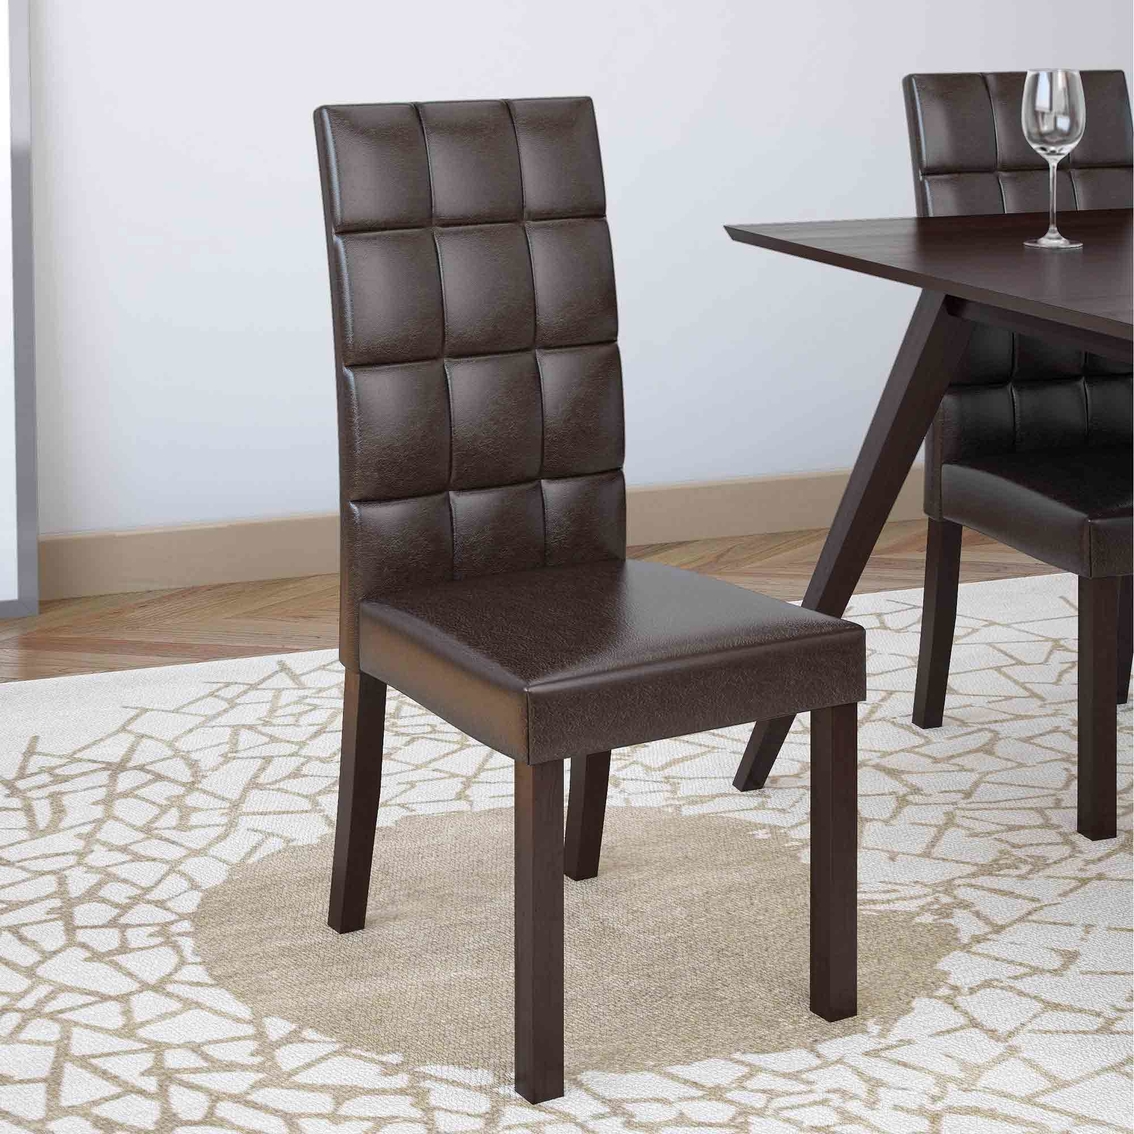 CorLiving DAL-895-C Atwood Leatherette Dining Chairs, Set of 2 - Image 3 of 3